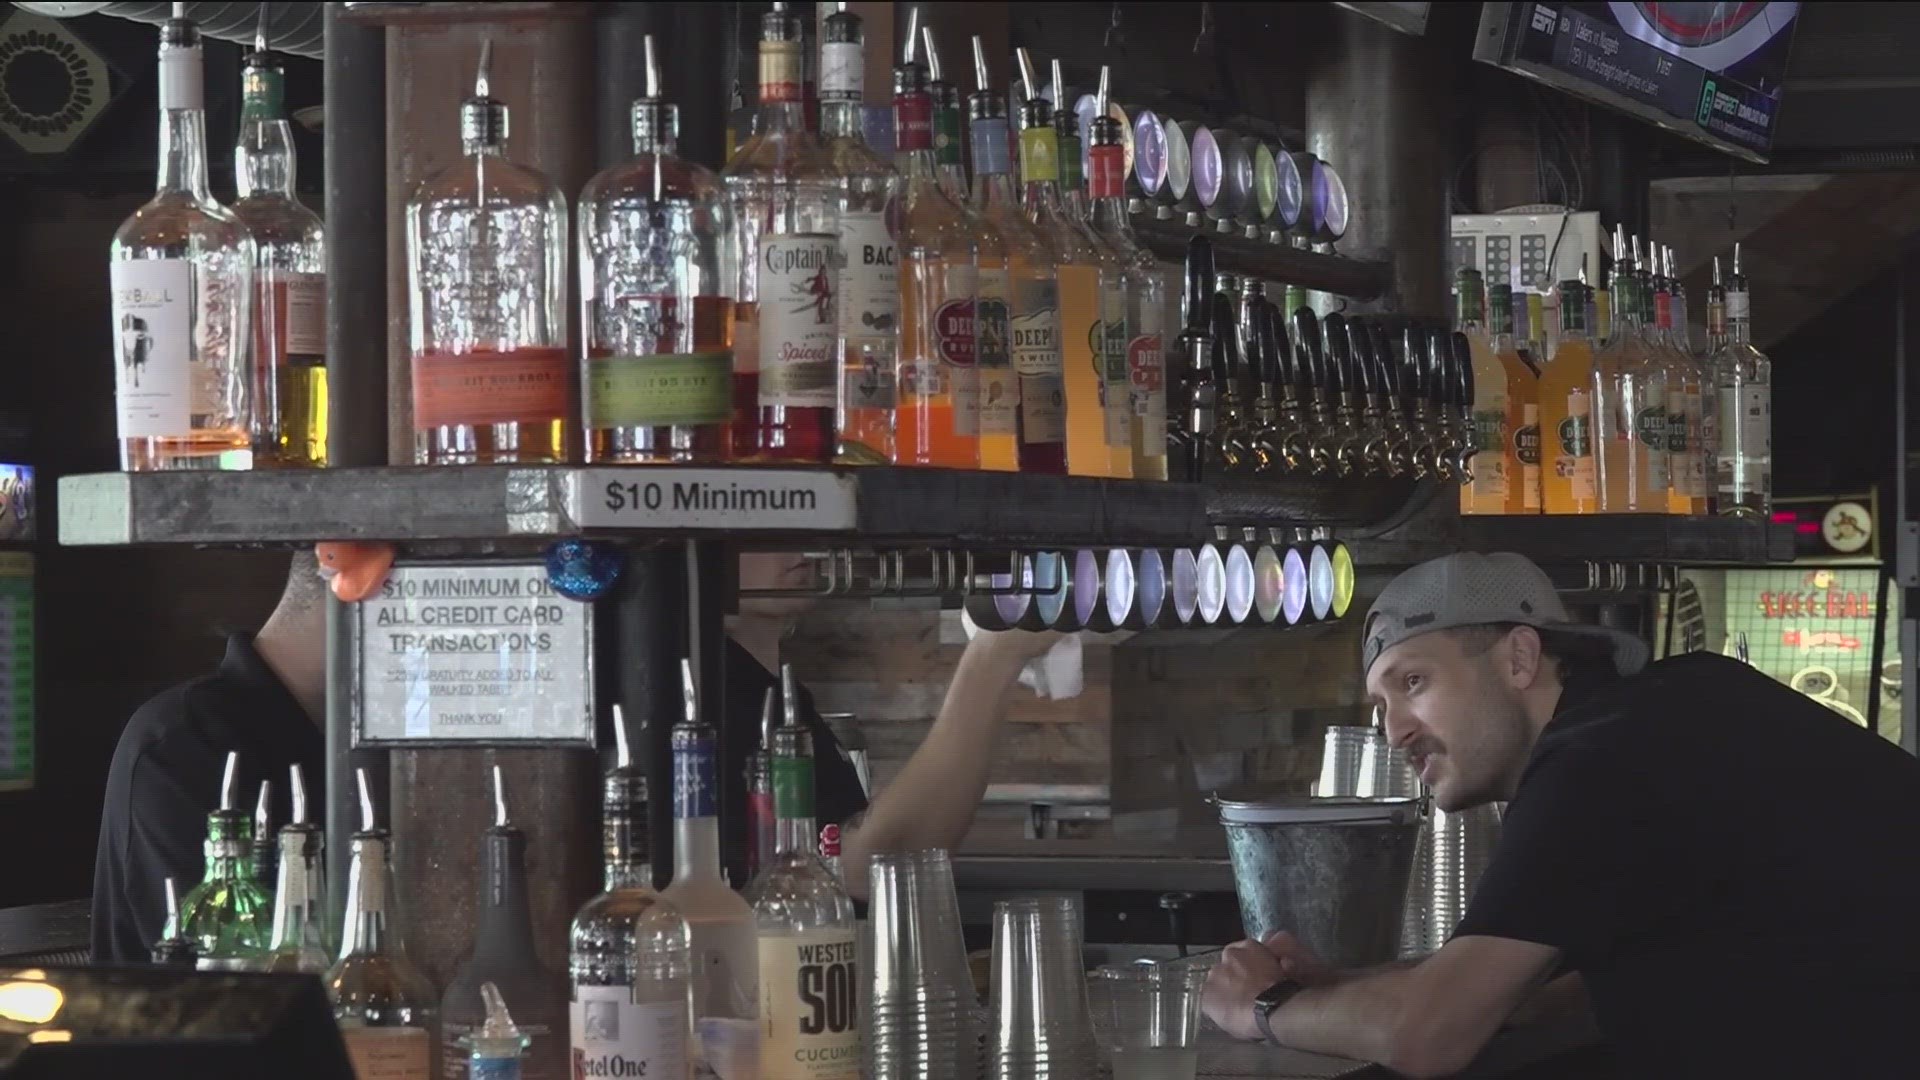 The city of Austin is teaming up with bar operators for a new safety program. It's called Sip Safely and it aims to cut down on druggings and drink tampering.